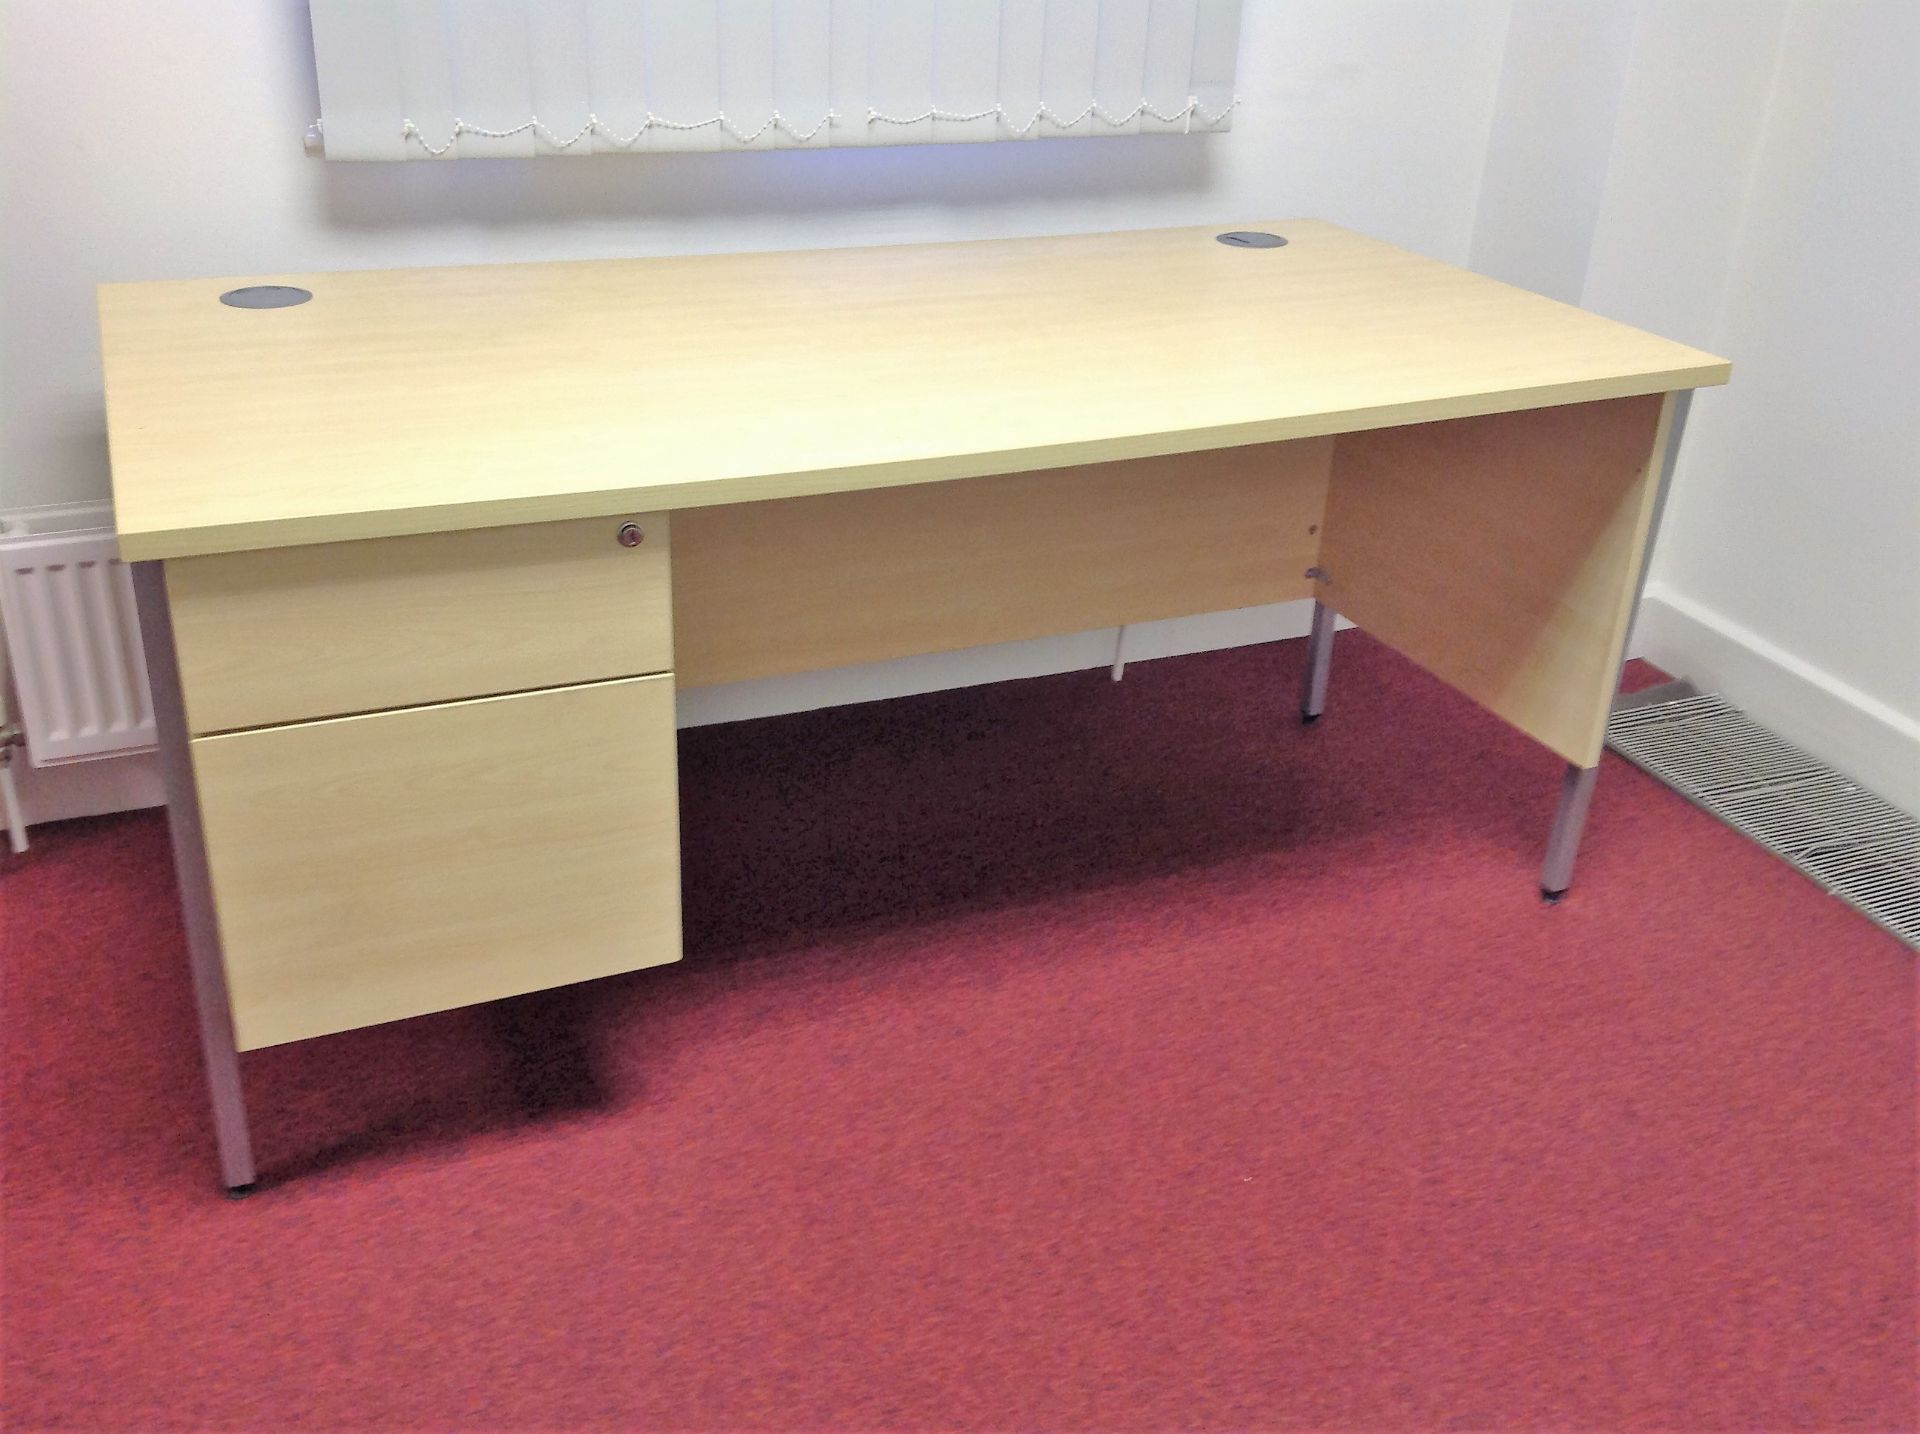 Rectangular Desk With Two Draw Unit Attached To The Left With Keys - Measurements: H: 72cm L: 160cm - Image 2 of 3